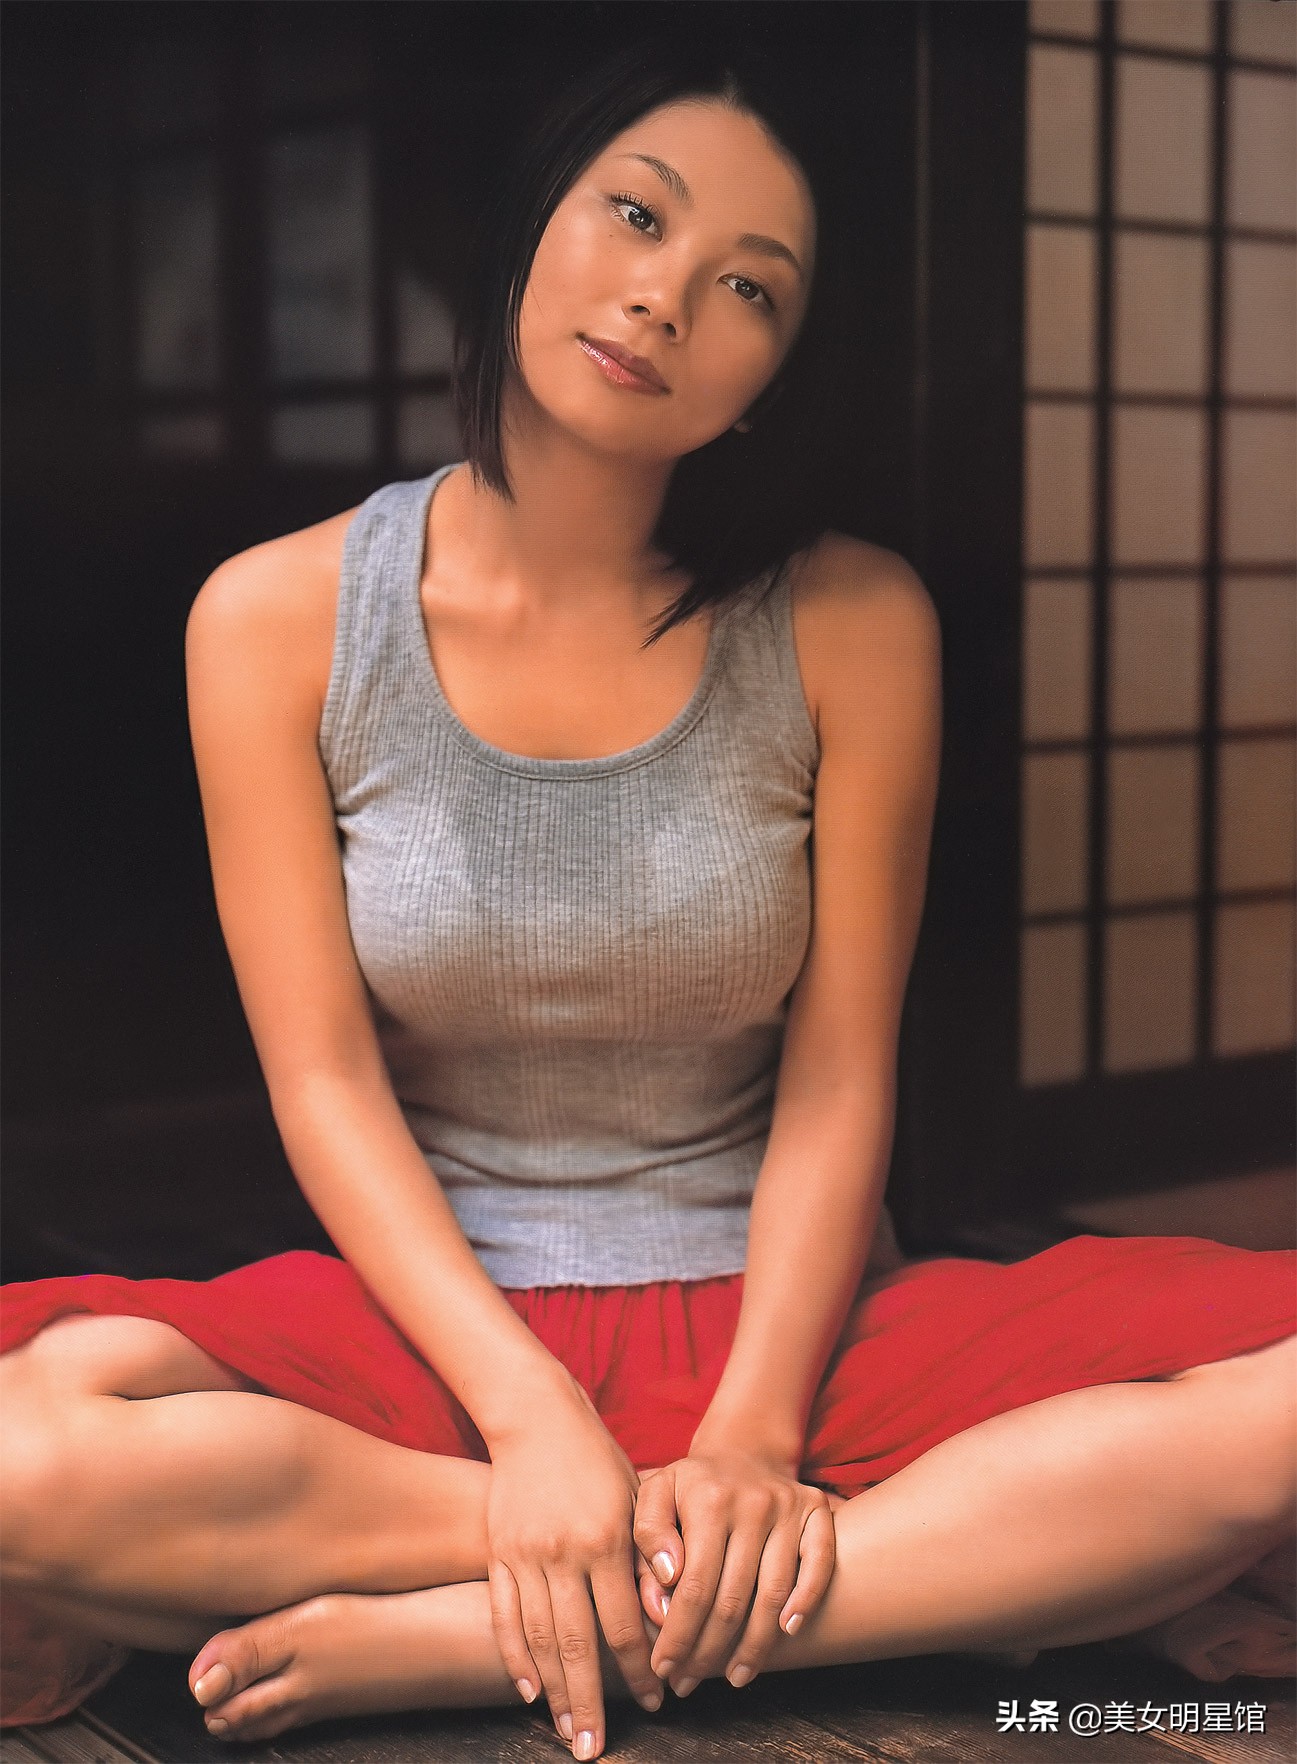 41-year-old Koike Eiko has a hot mature and elegant figure, and the Japanese sexy goddess has a taste - iNEWS